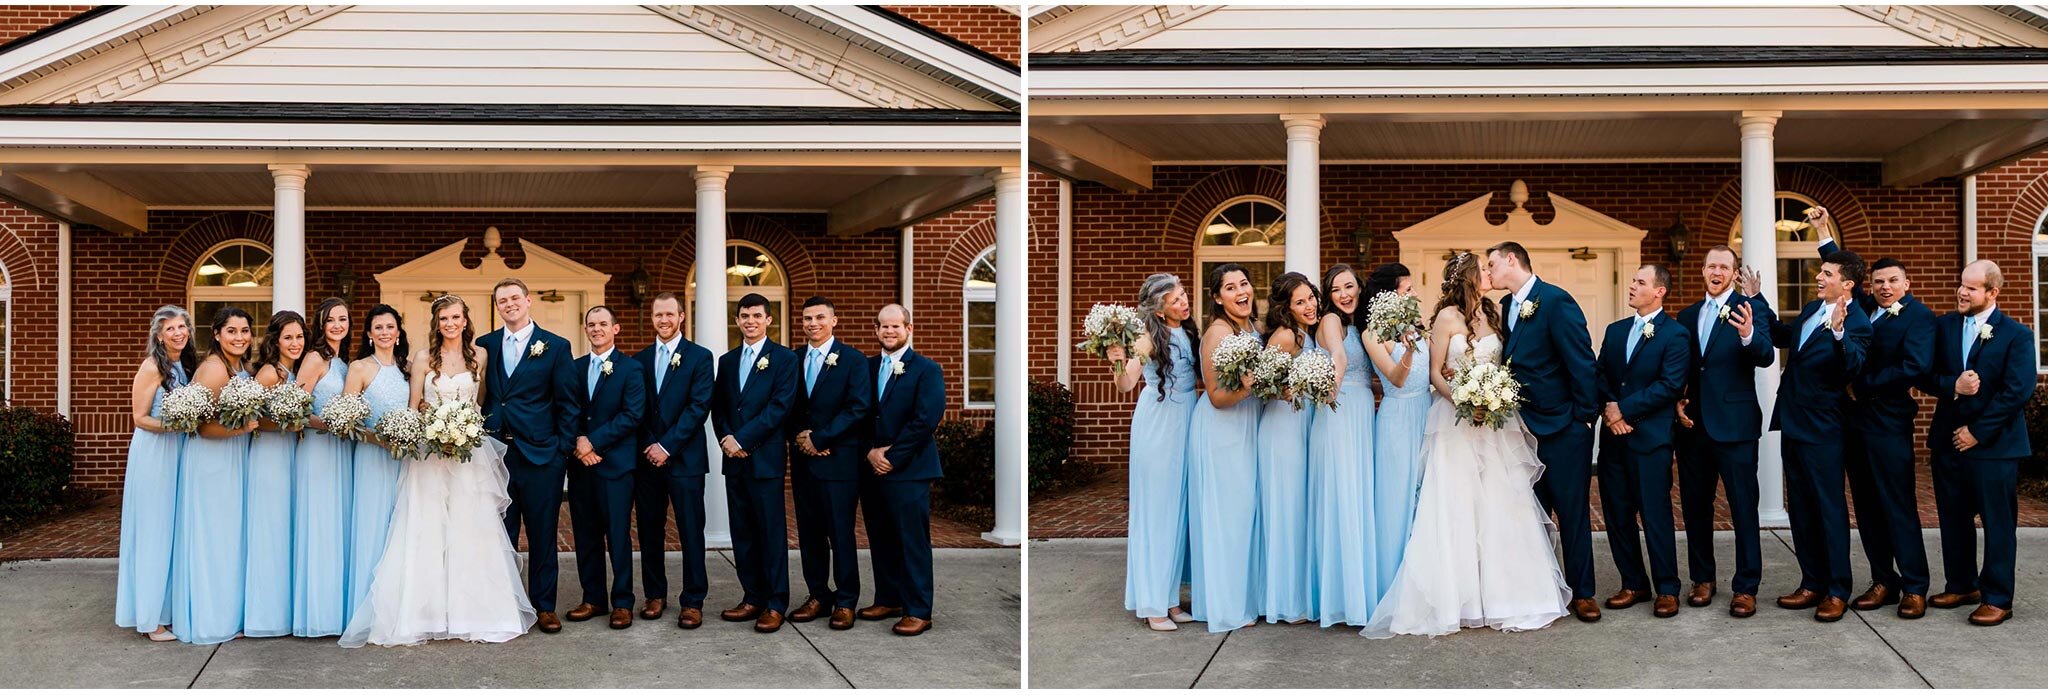 Durham Wedding Photographer | By G. Lin Photography | Wedding party cheering together for bride and groom